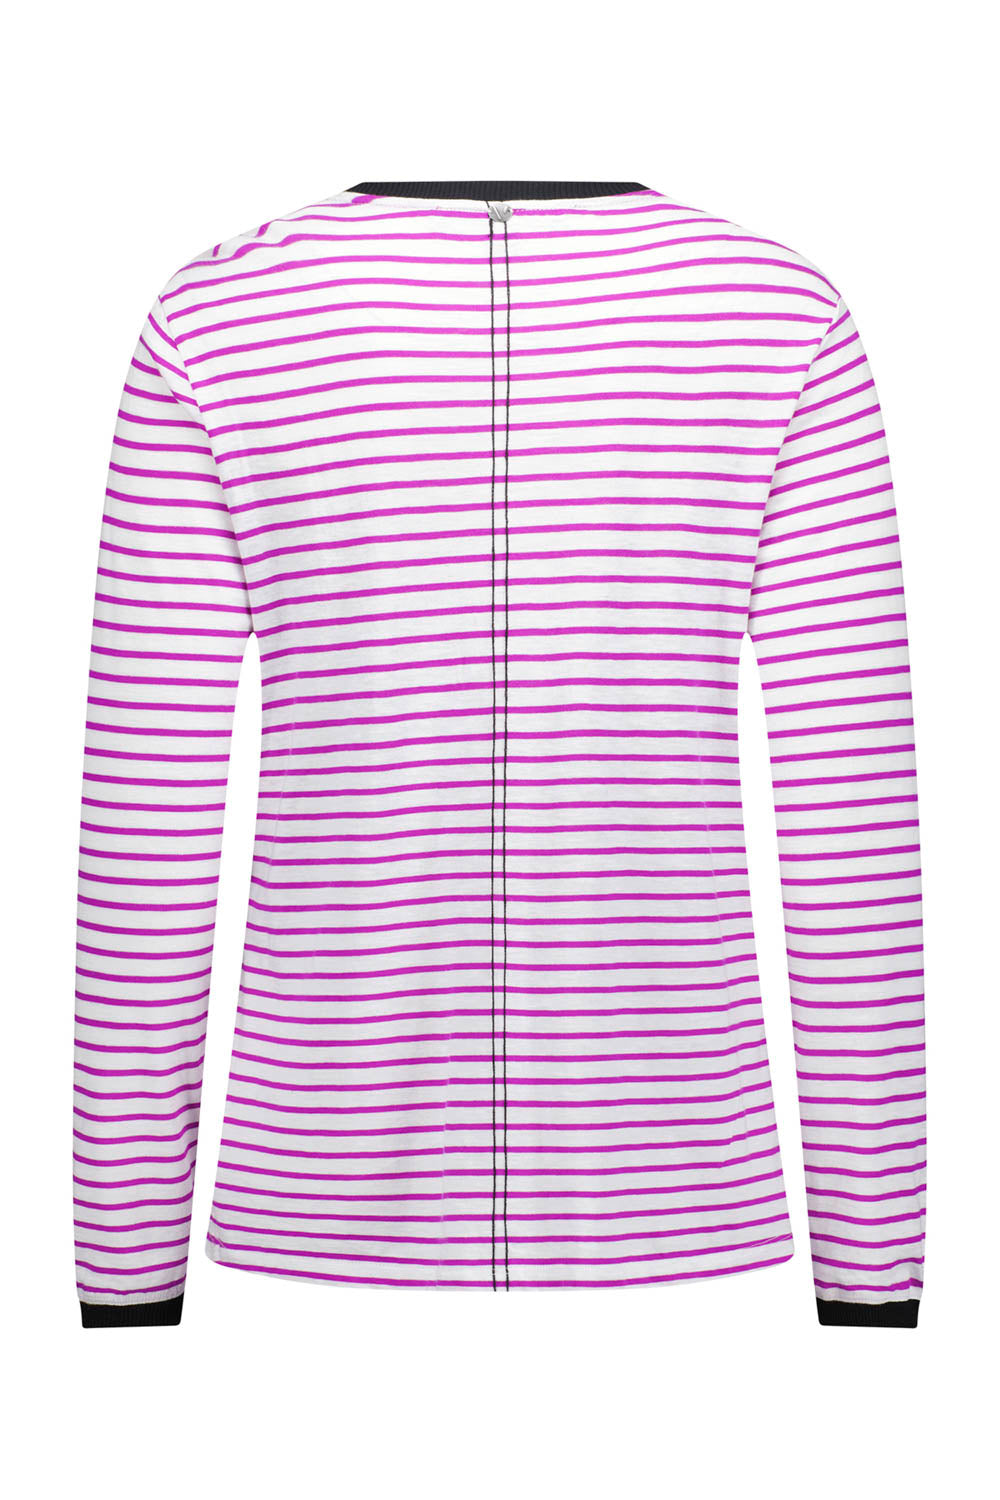 Kit Top - Orchid Stripe